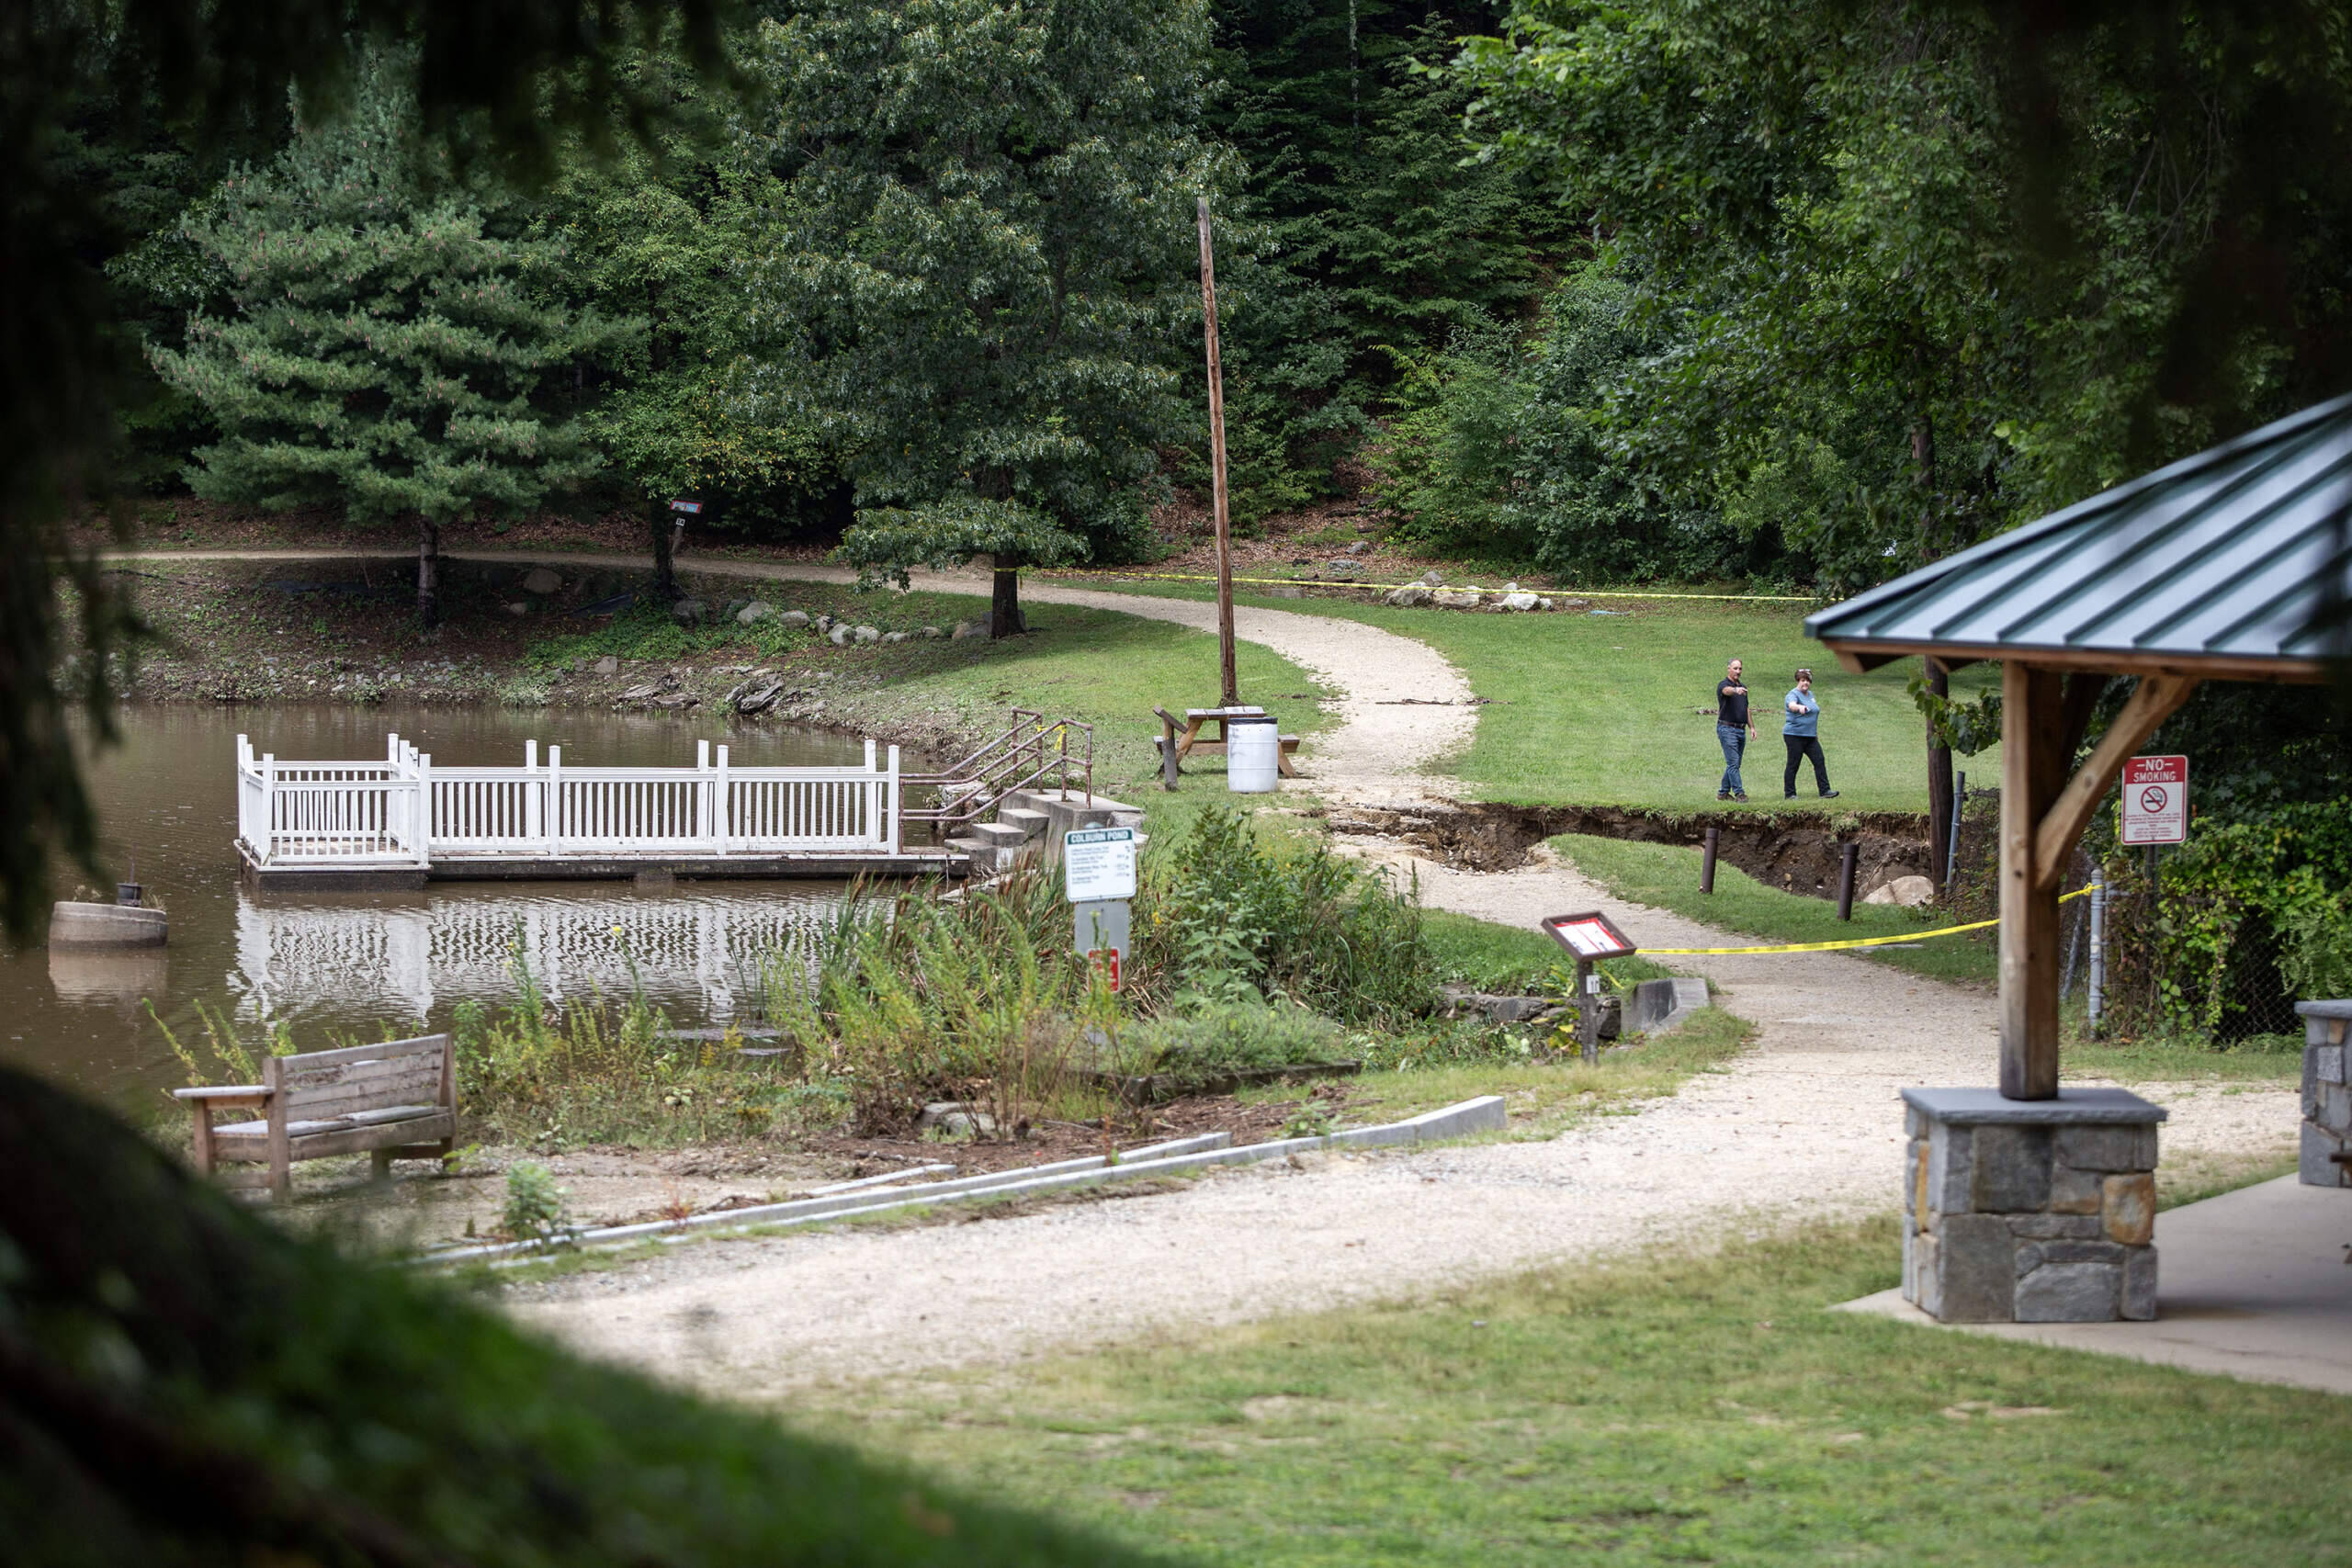 Officials inspect an area behind a dam in Barrett Park in Leominster that sustained damaged from the flooding. (Robin Lubbock/WBUR)